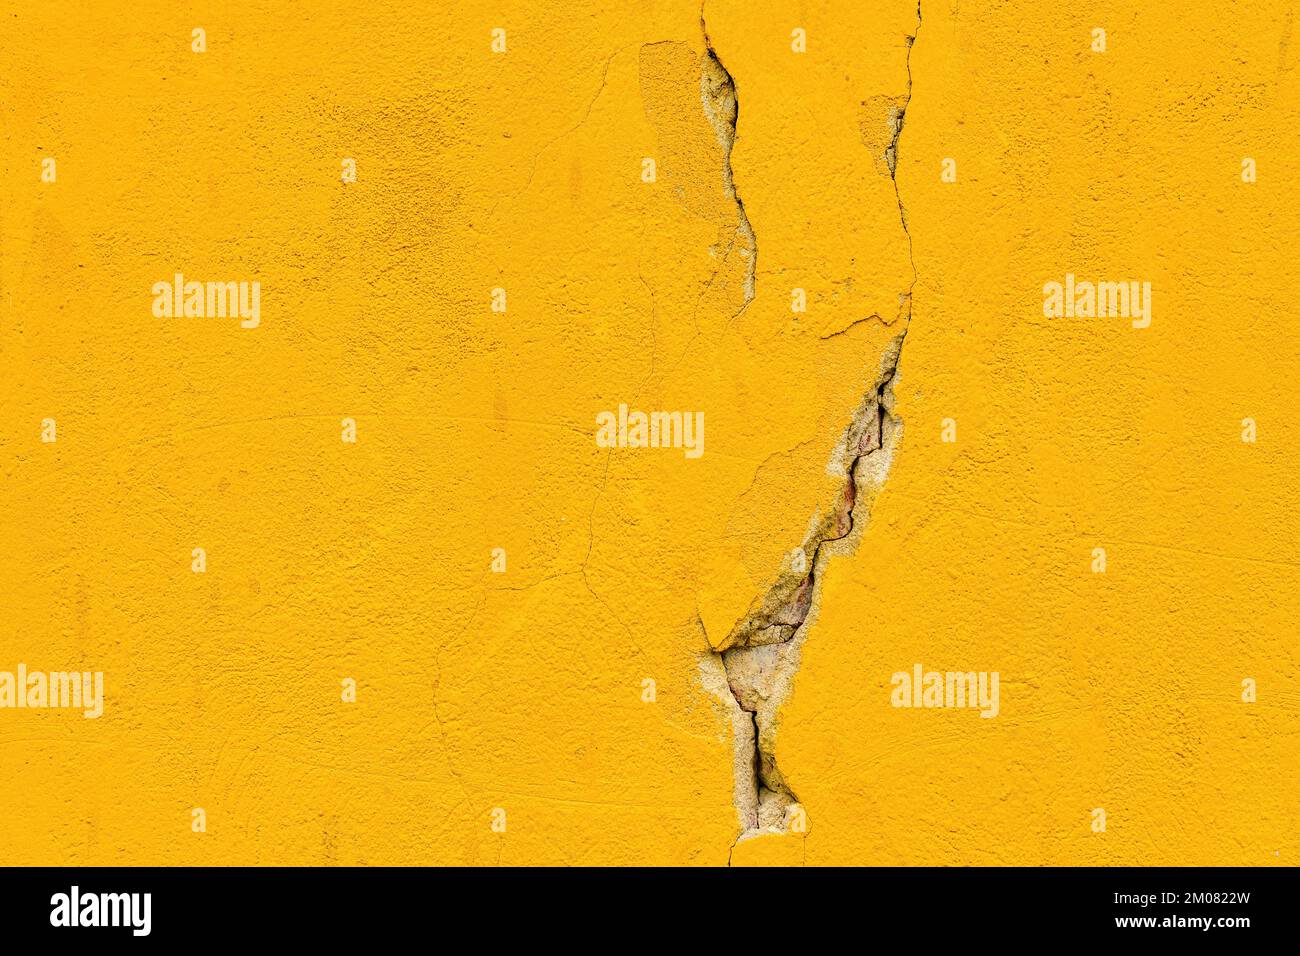 Damaged cracked yellow concrete wall as background and copy space Stock Photo